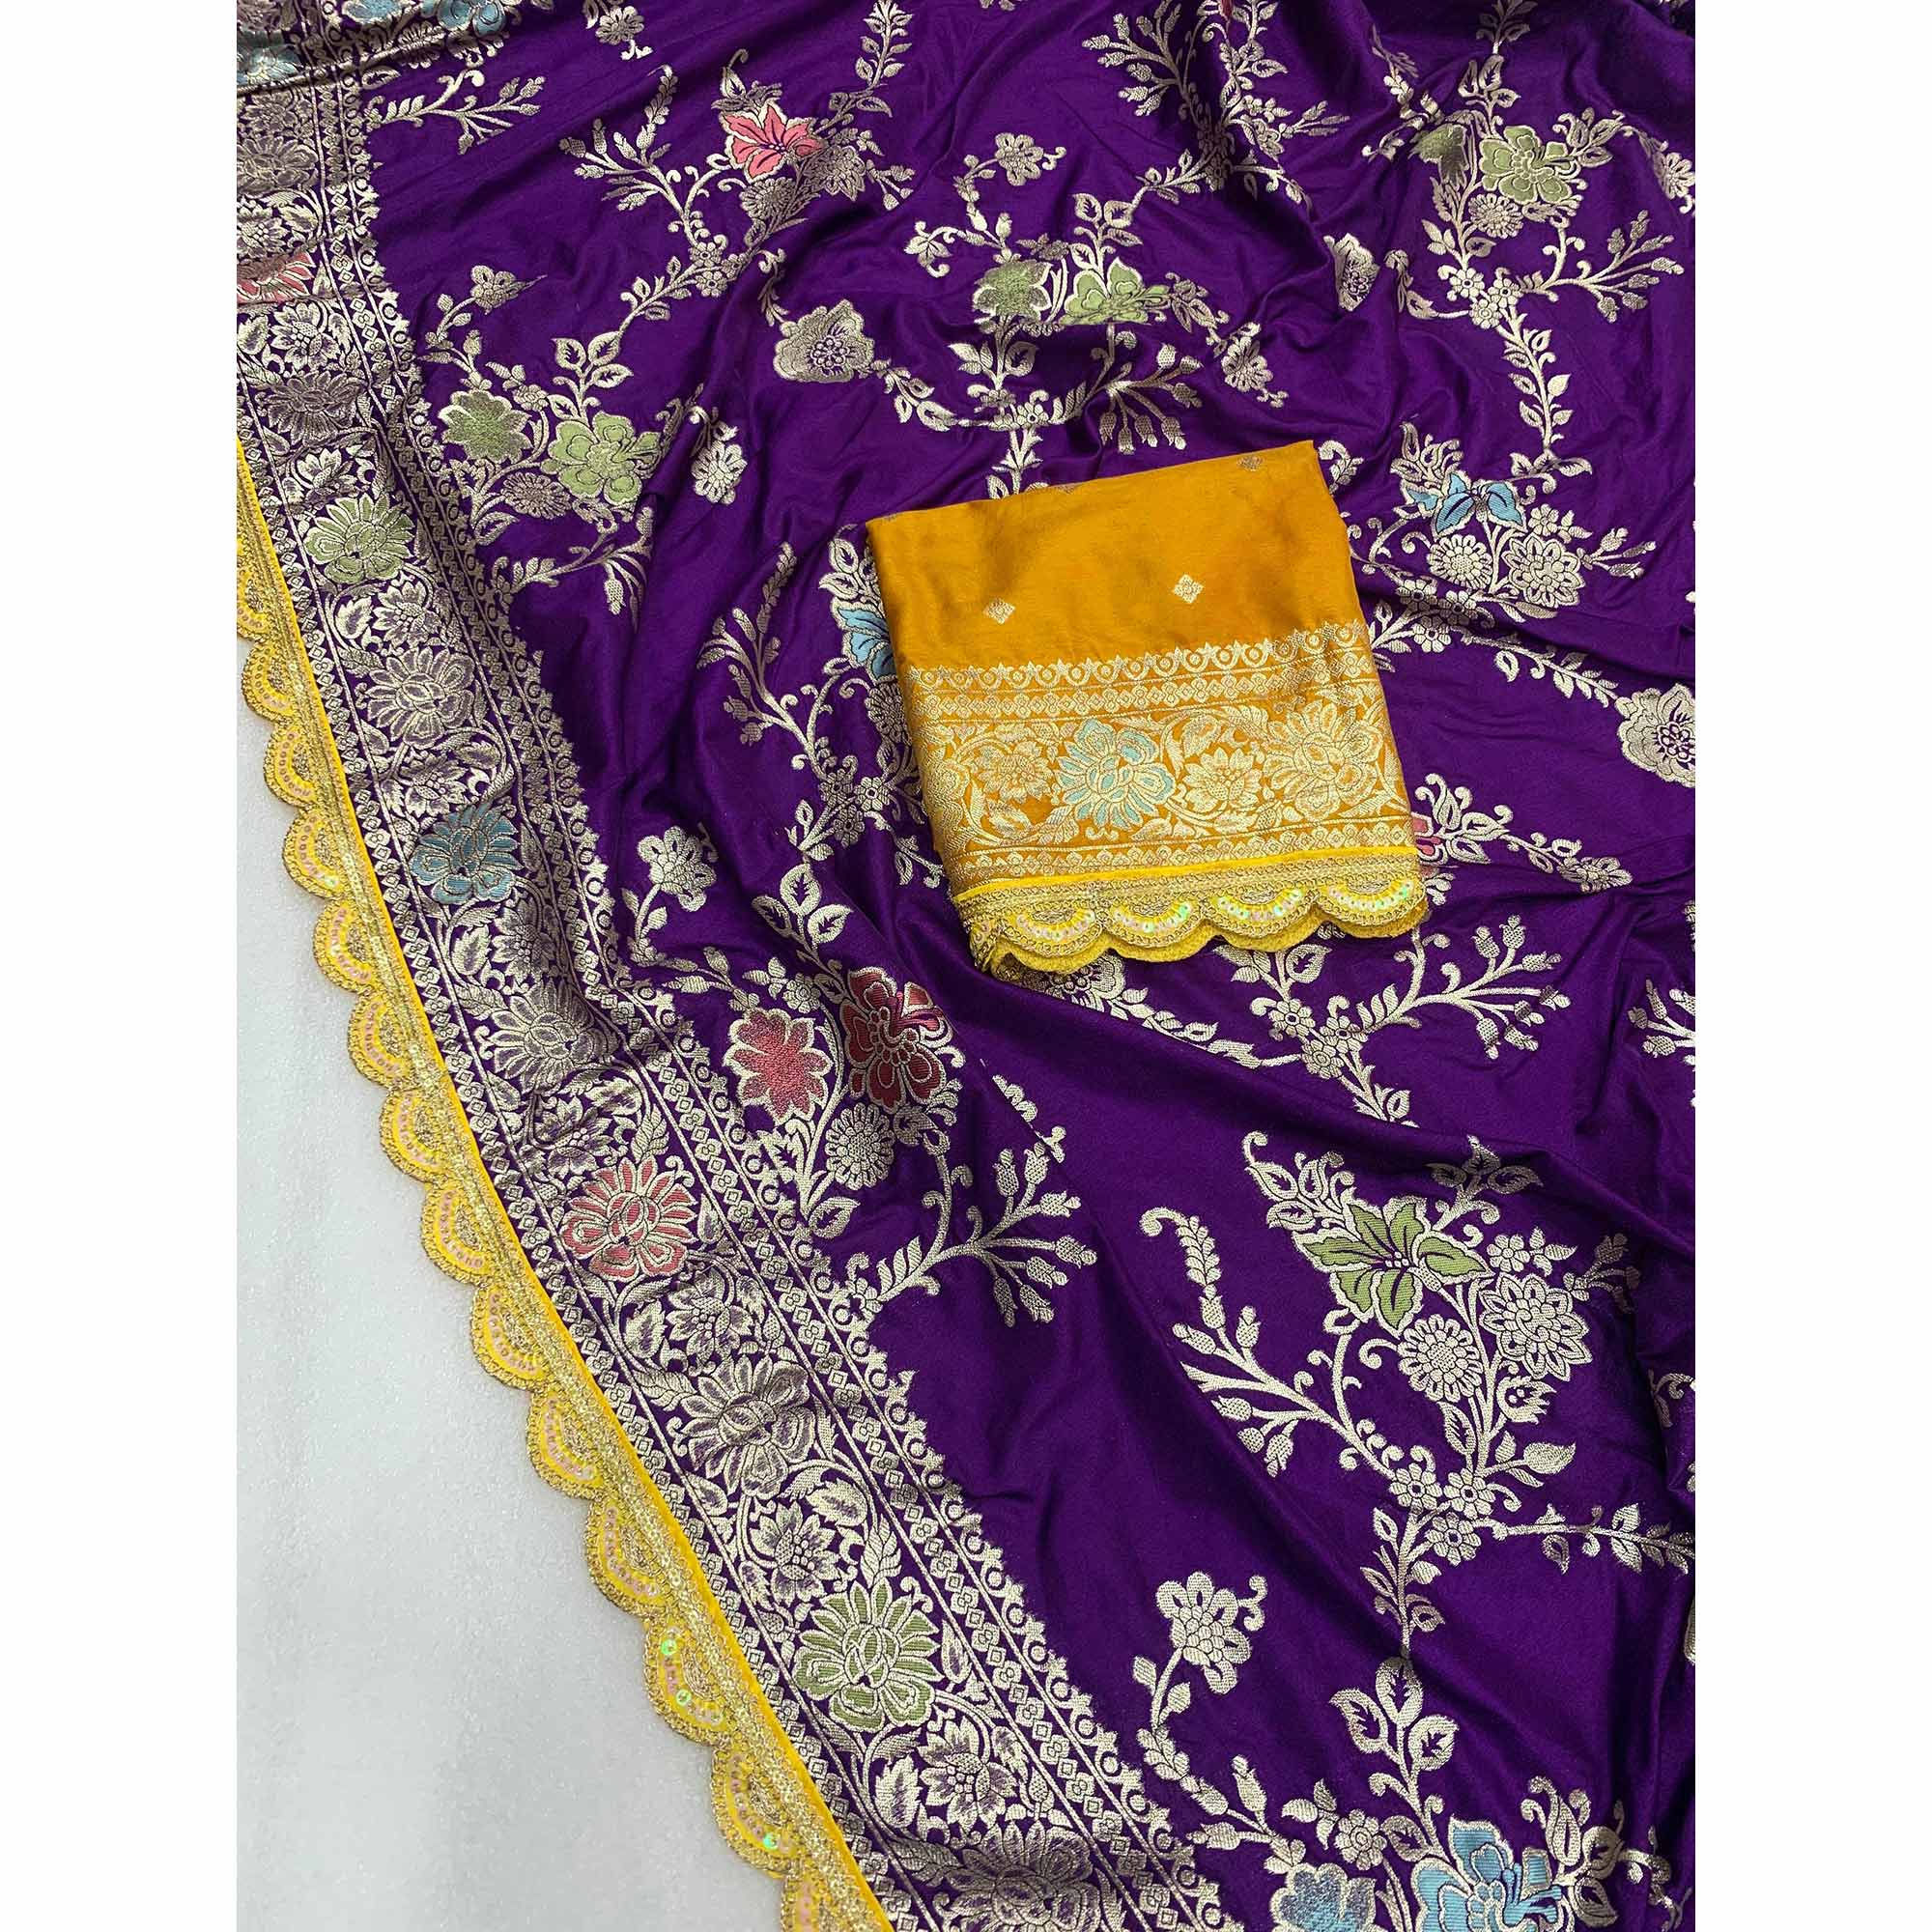 Purple Floral Woven Dola Silk Saree With Lace Border